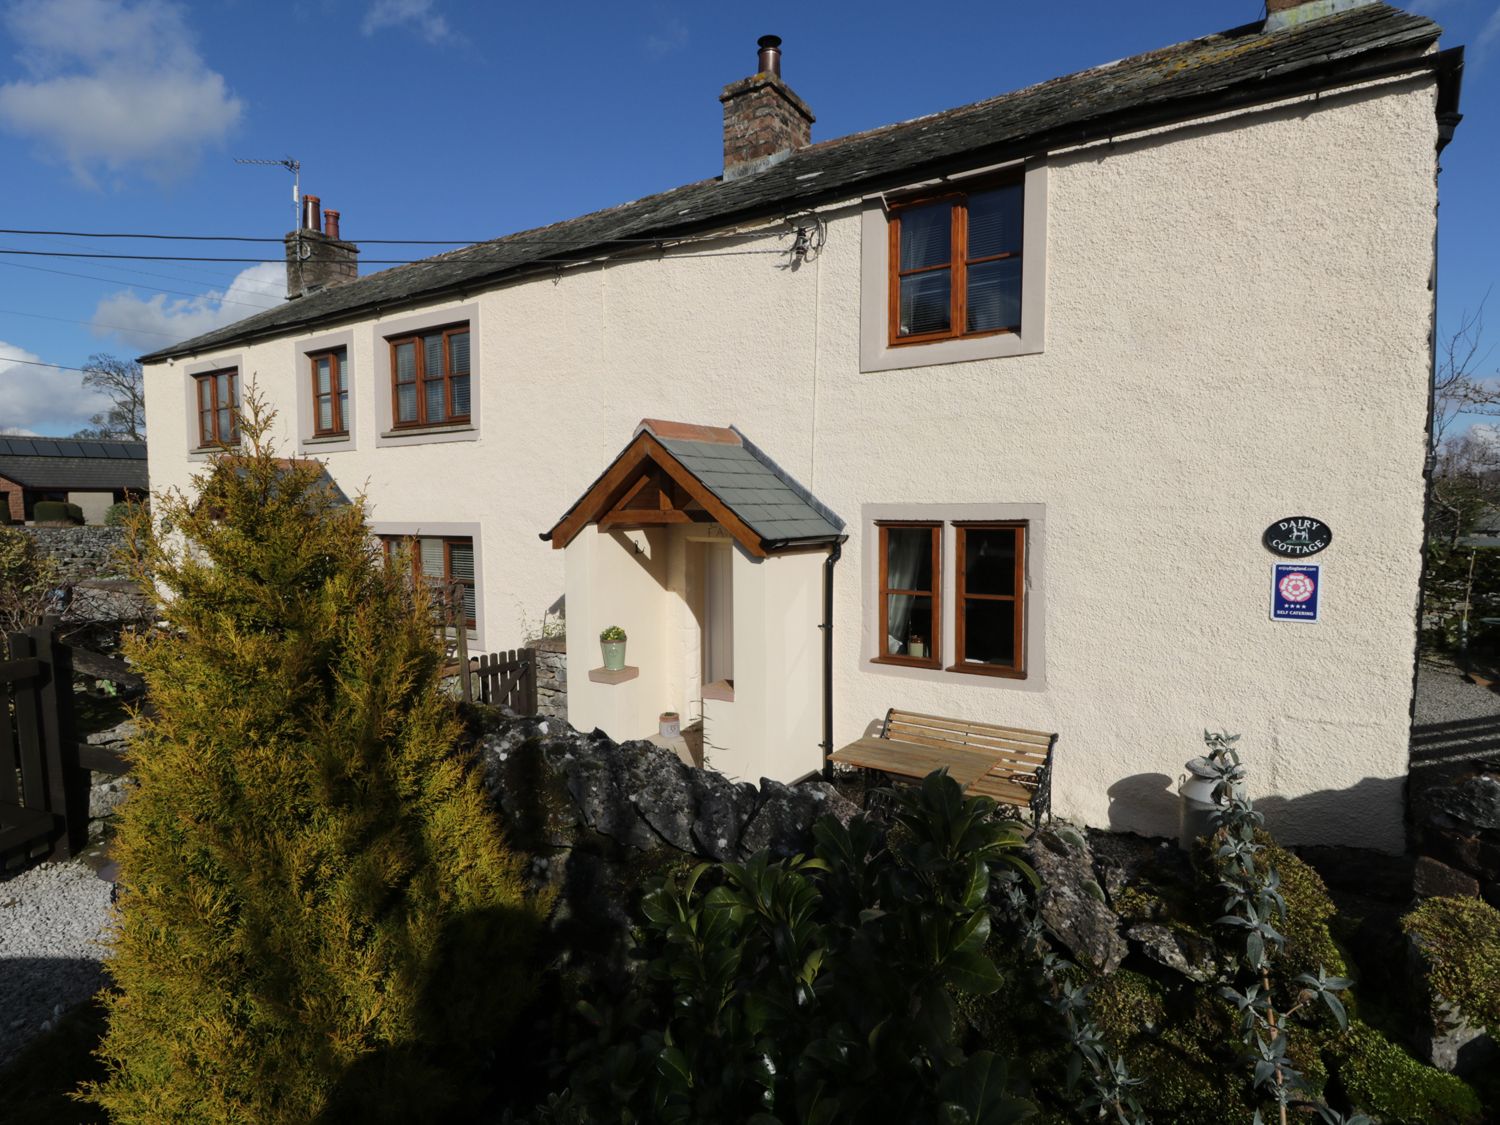 Dairy Cottage - Lake District - 972413 - photo 1